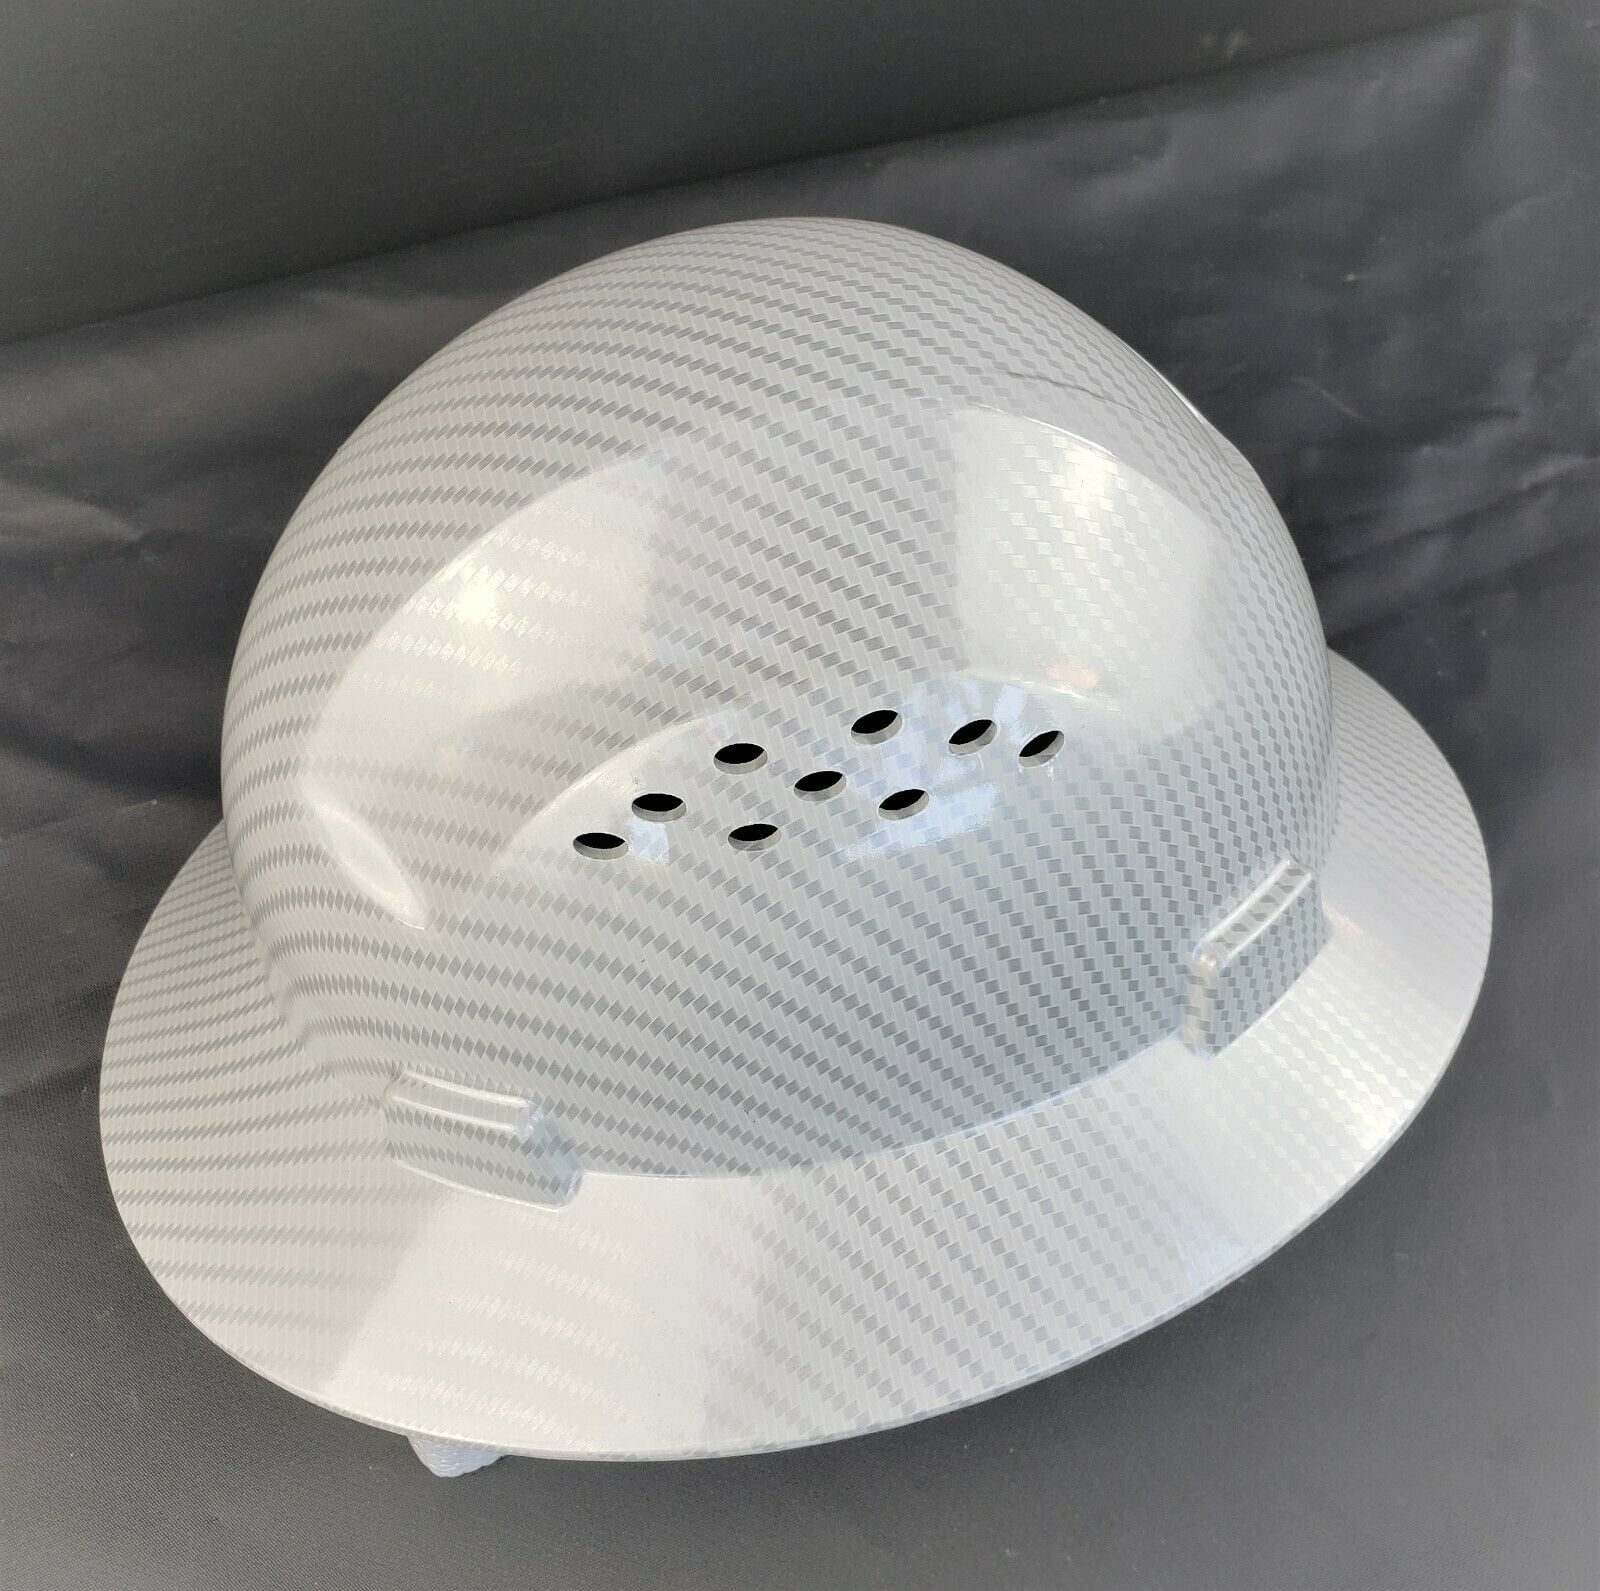 HDPE Hydro Dipped Full Brim Hard Hat with Fas-trac Suspension White